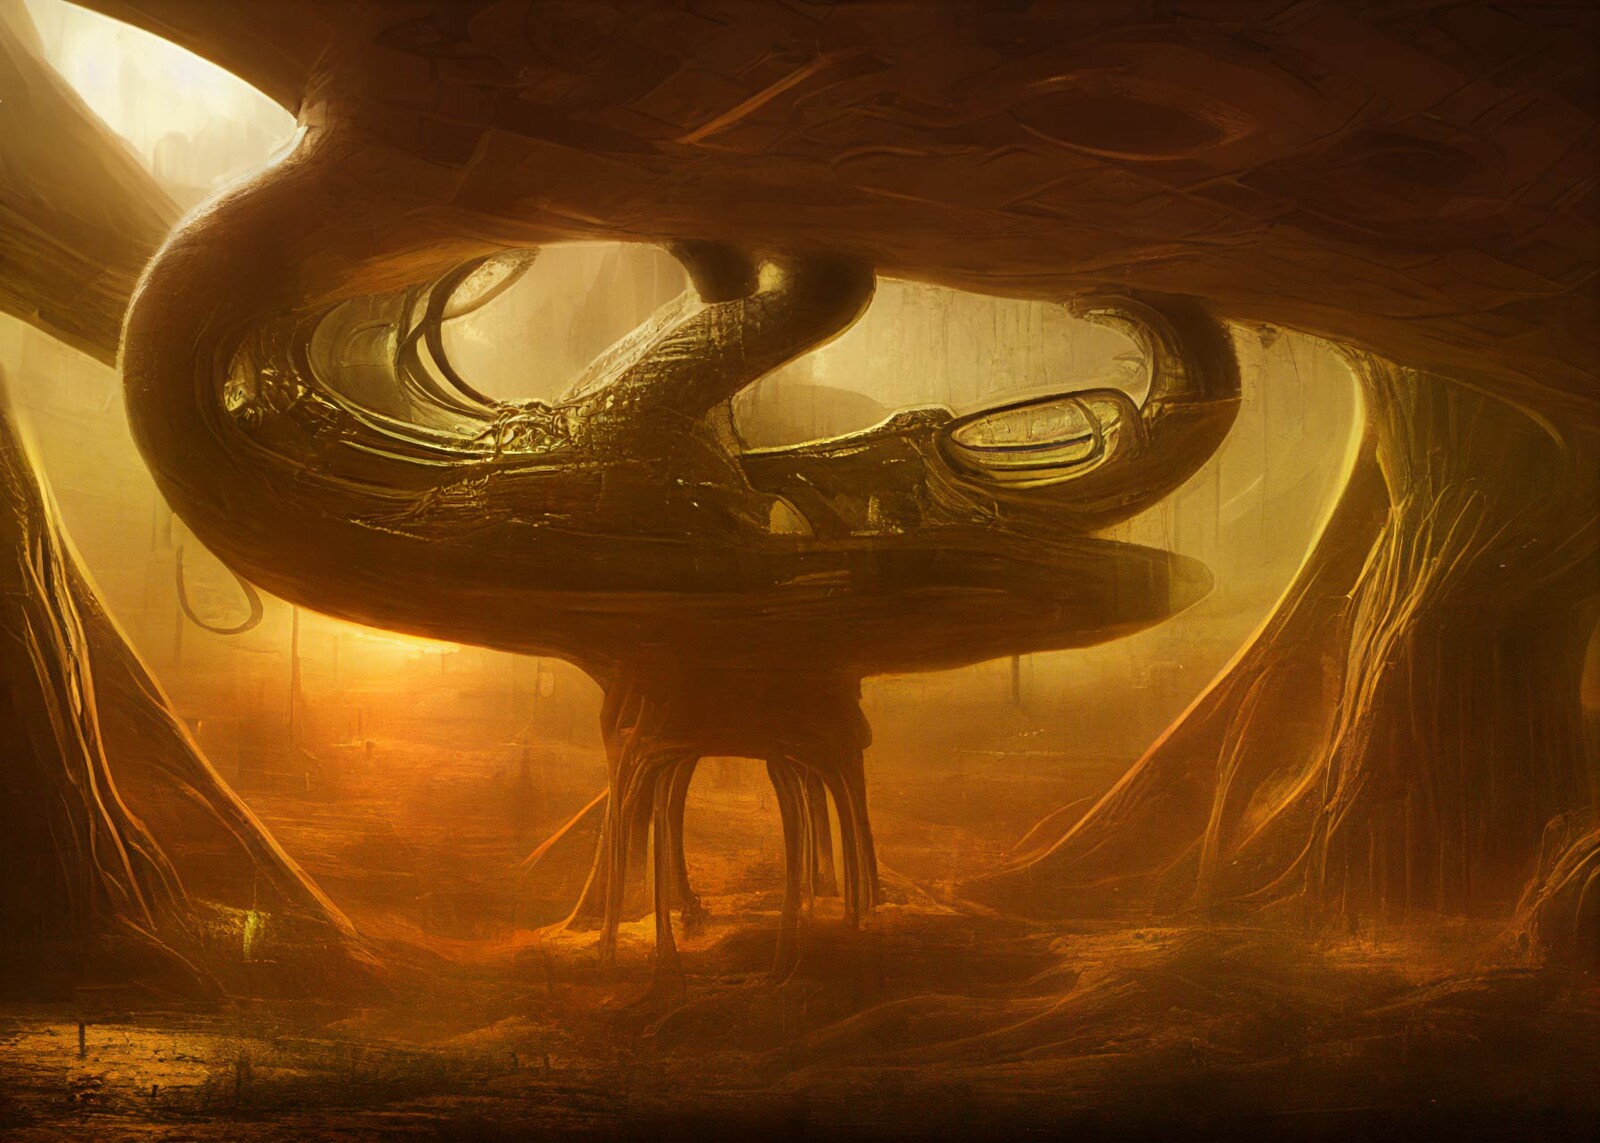 Text to Image: A secret alien cat civilization inspired by HR Giger.